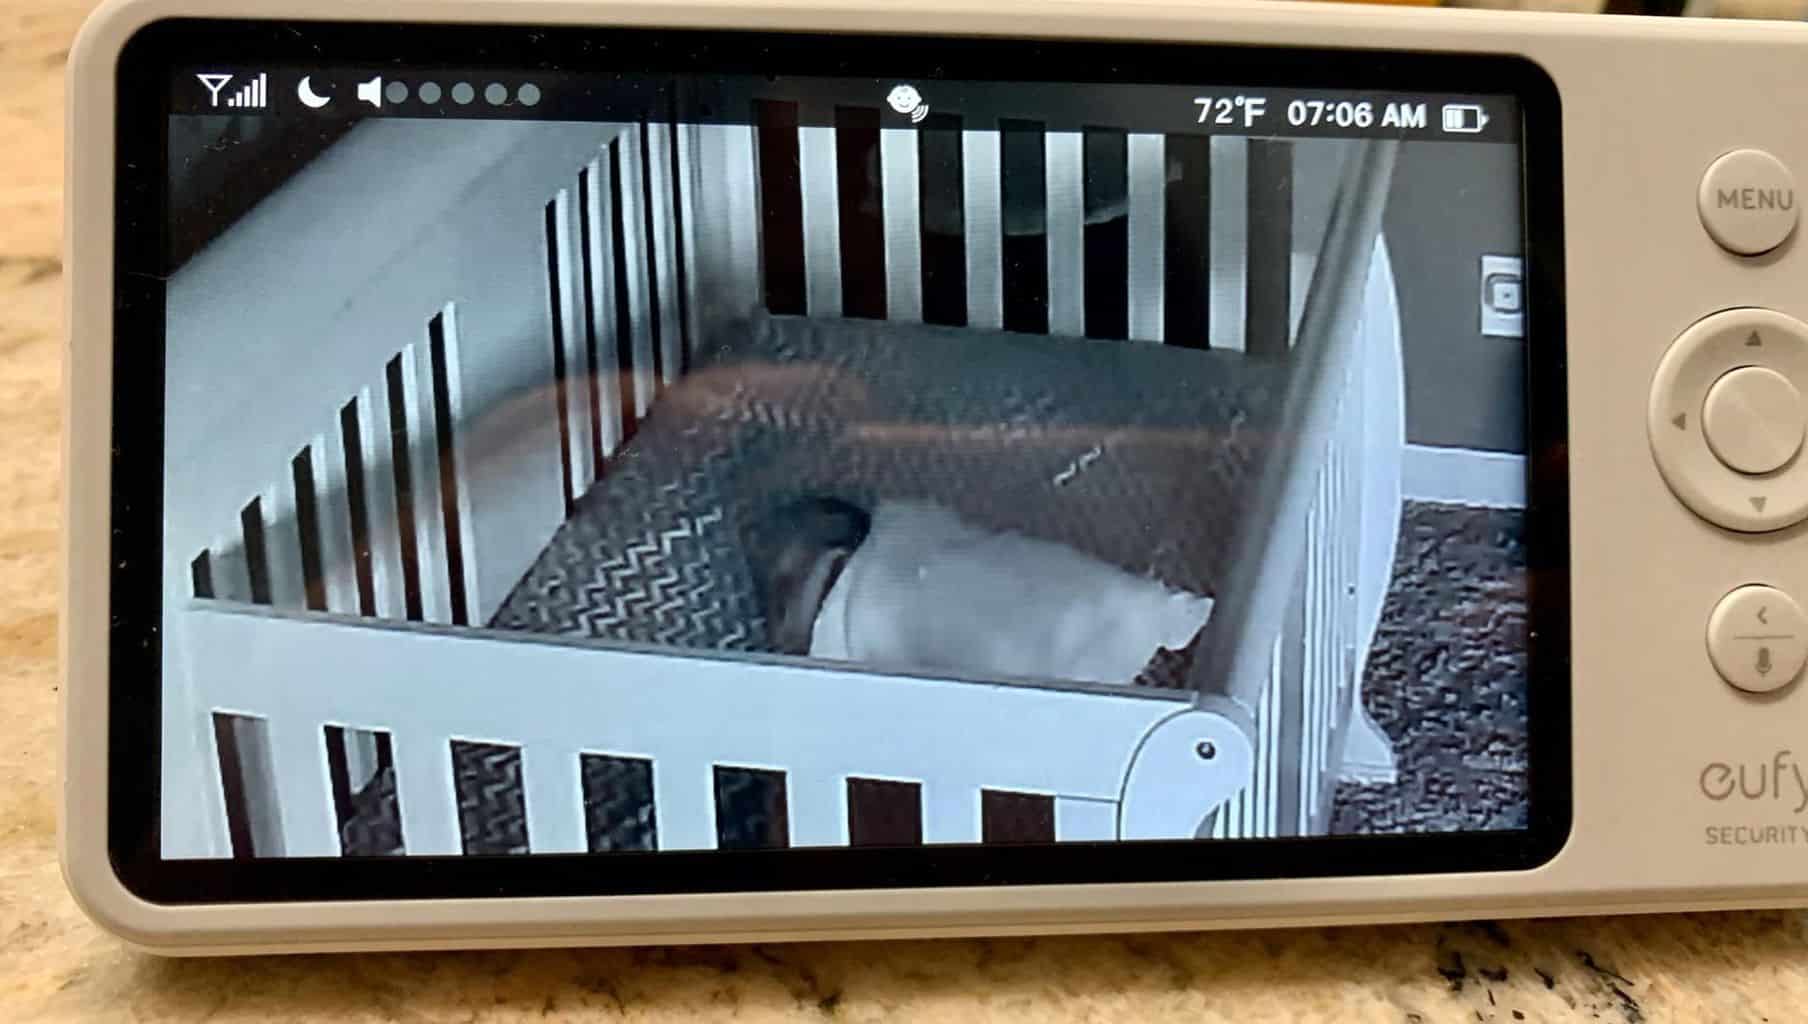 Eufy SpaceView baby monitor monochrome night-vision display. - Eufy SpaceView Baby Monitor Review | Baby Journey 